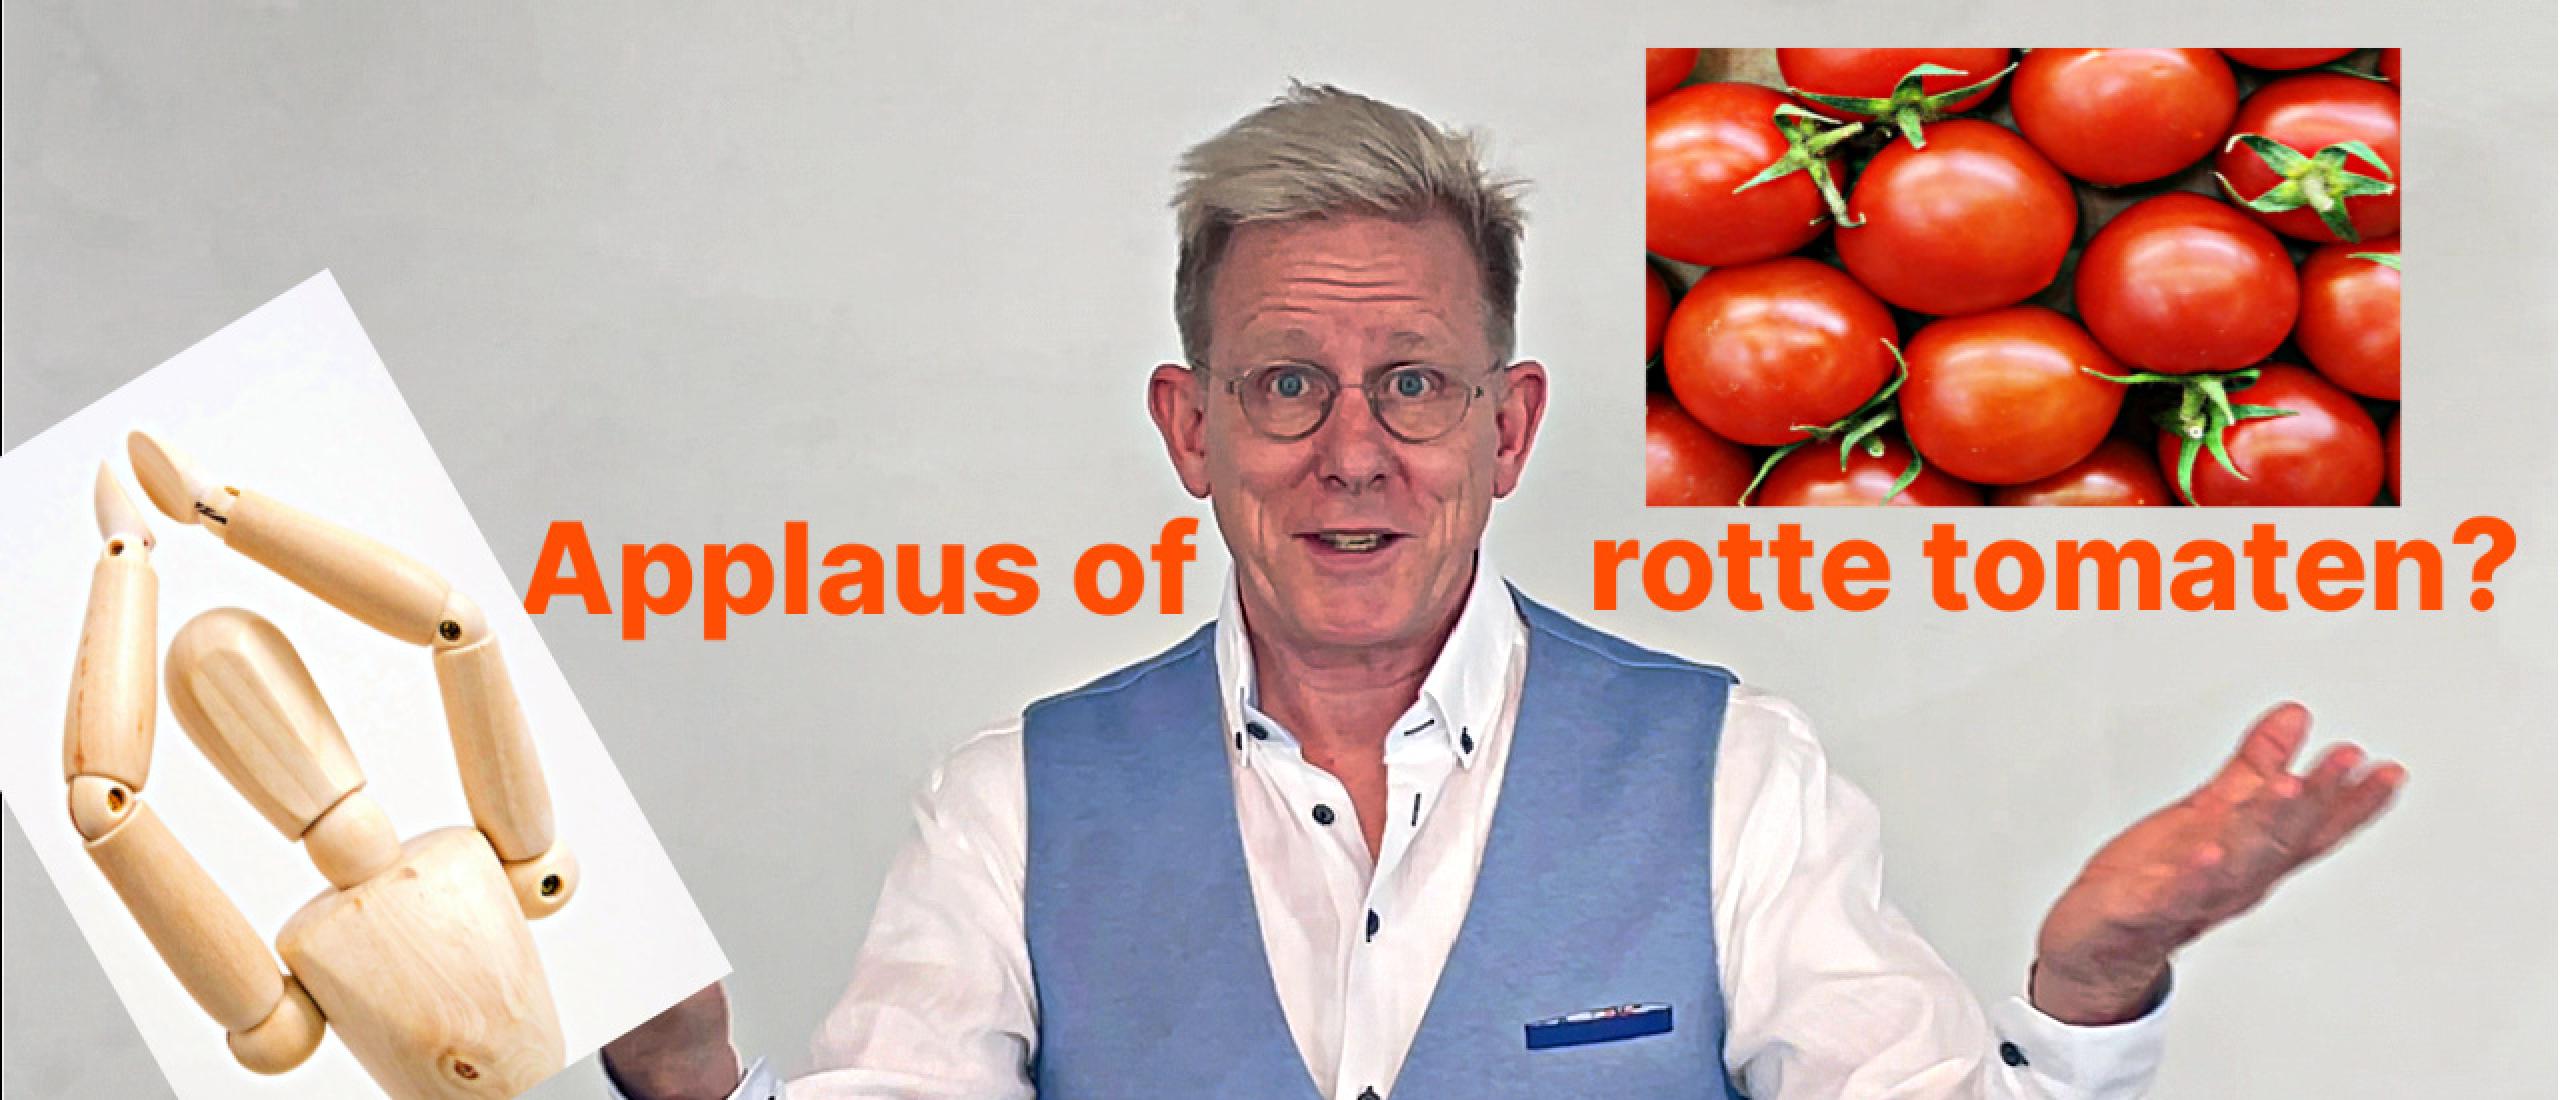 Applaus of rotte tomaten?